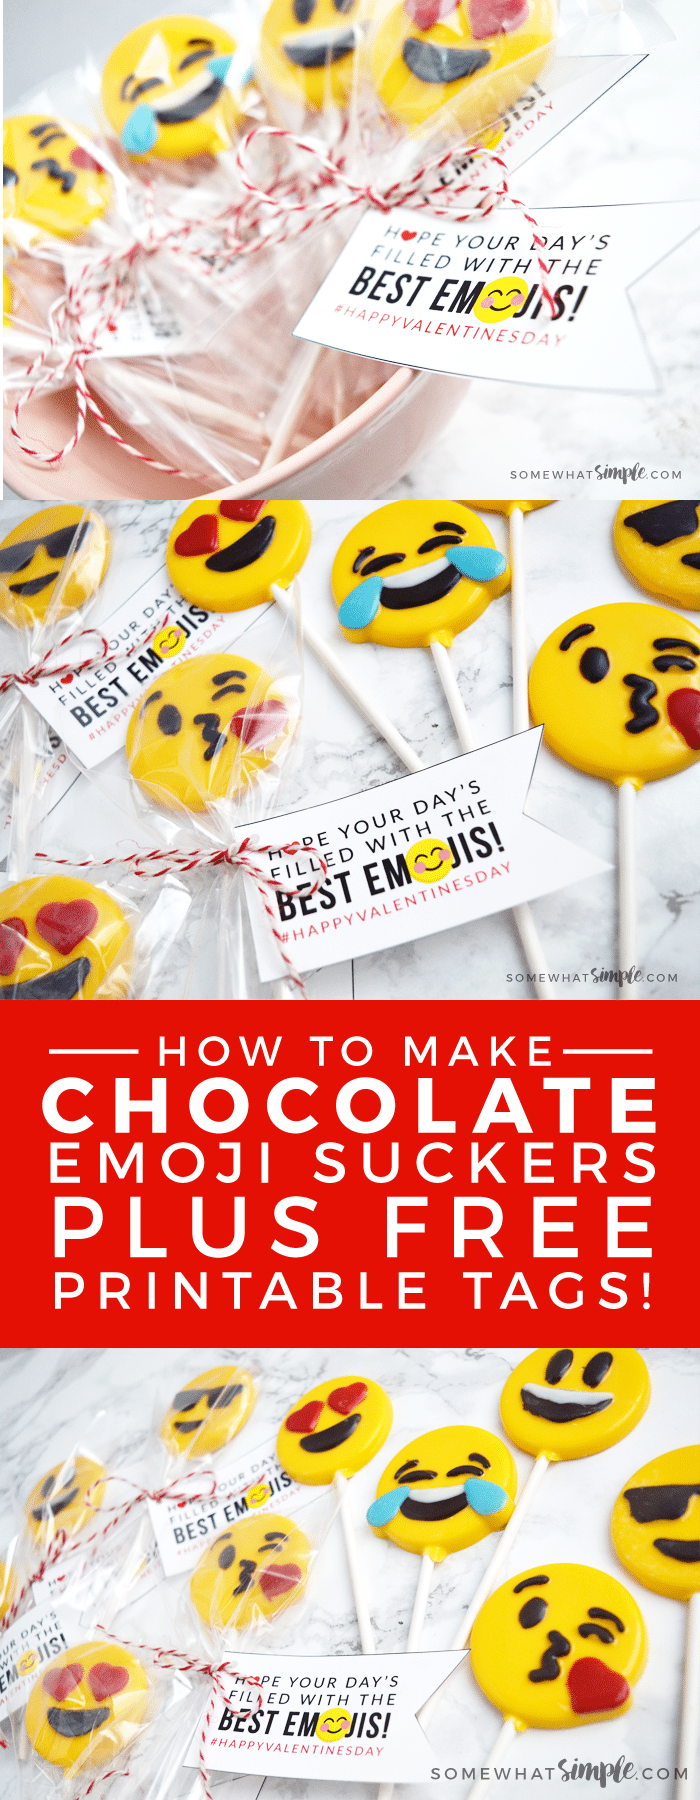 Chocolate Emoji Suckers + Free Printable Gift Tags! Making chocolate suckers is easier than you think! Learn how to make Chocolate Emoji Suckers, and grab our free printable tags to turn these into an adorable Valentine's gift! via @somewhatsimple